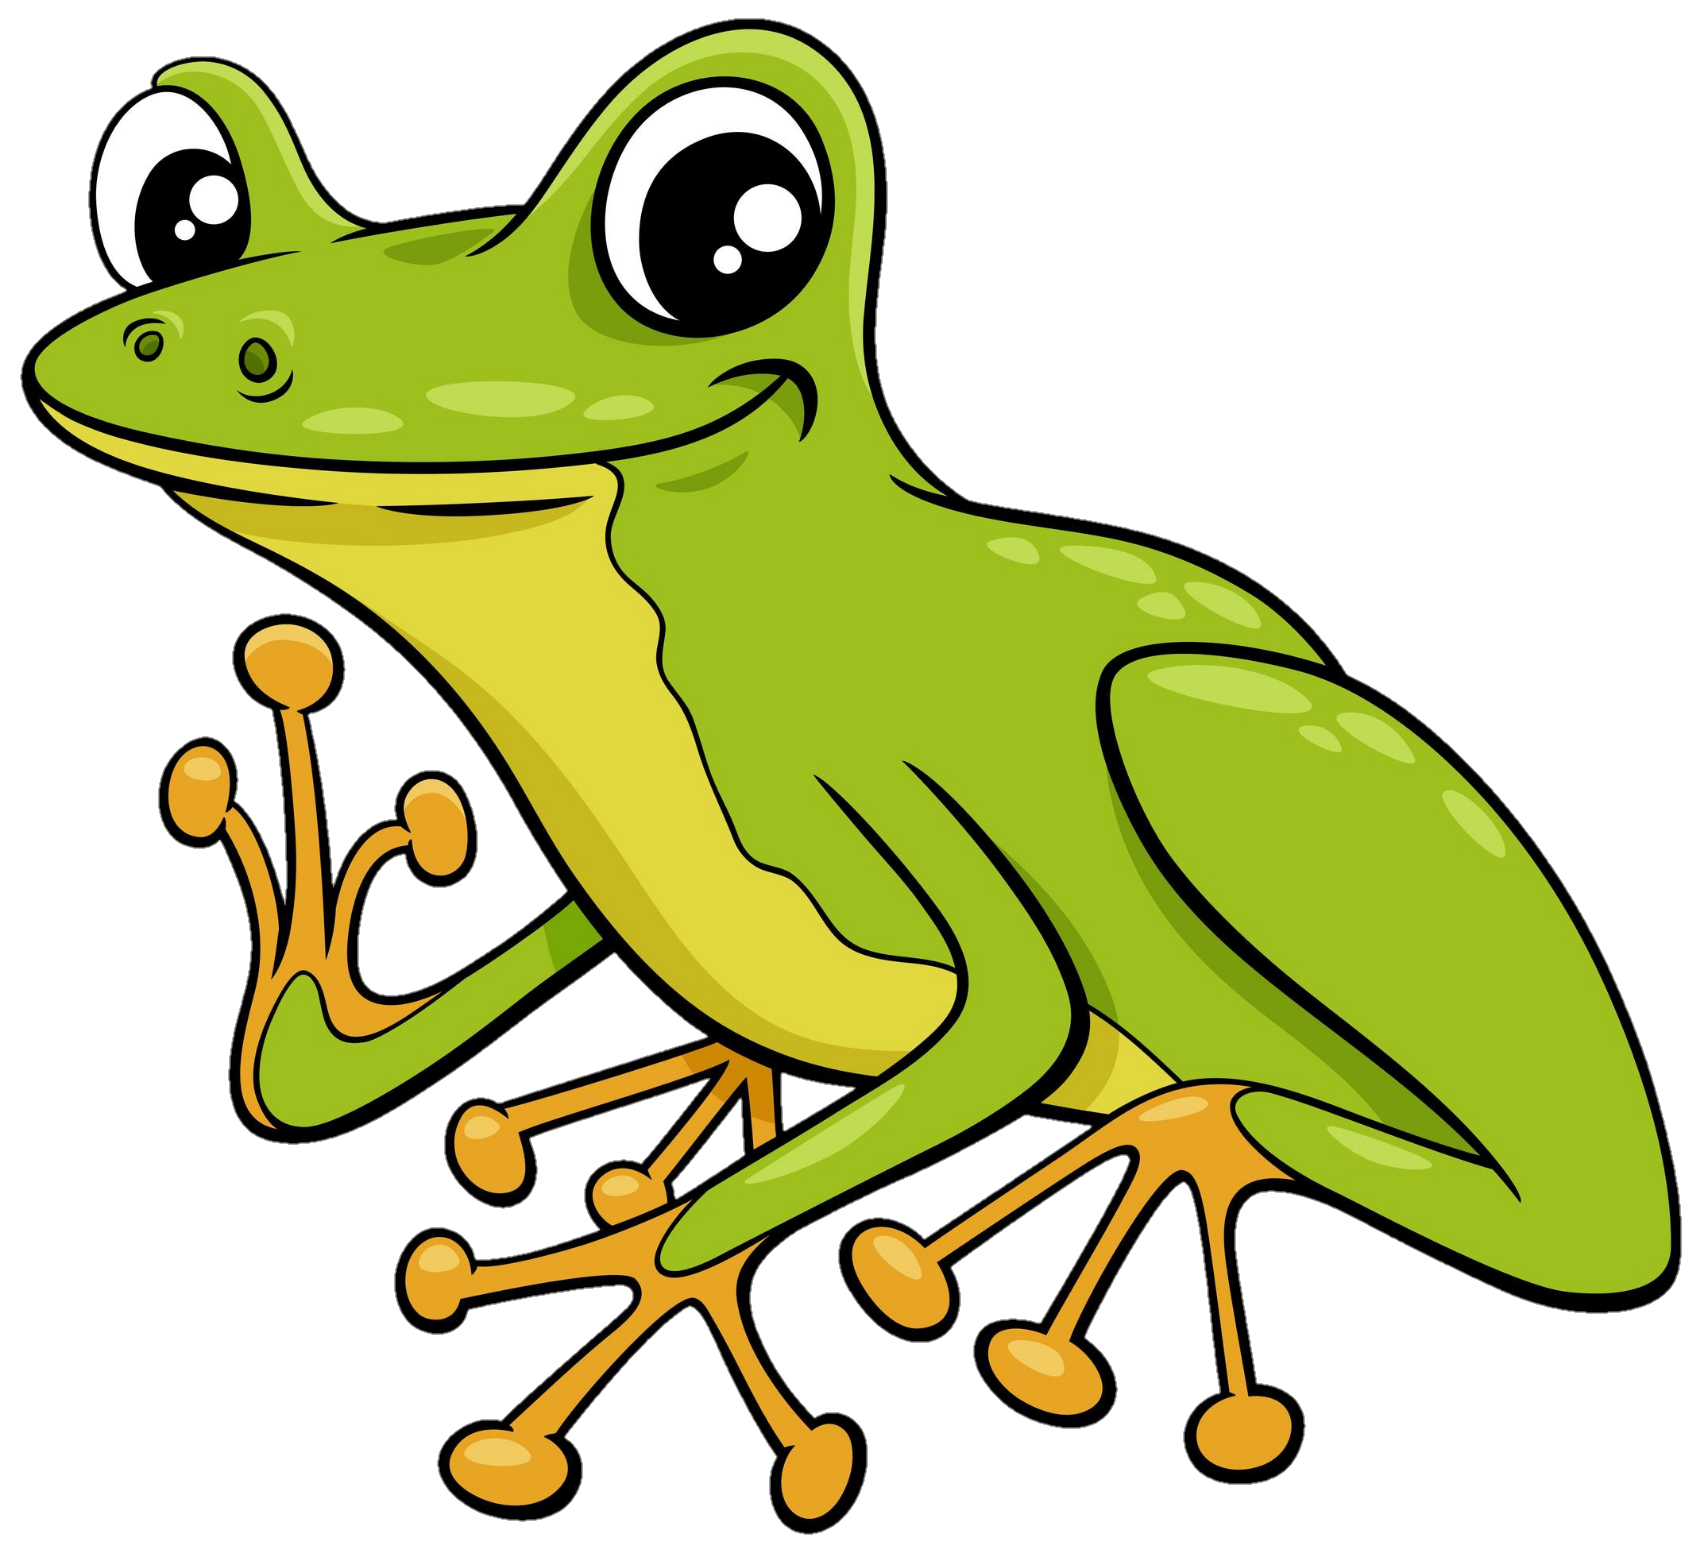 frog-png-image-from-pngfre-6